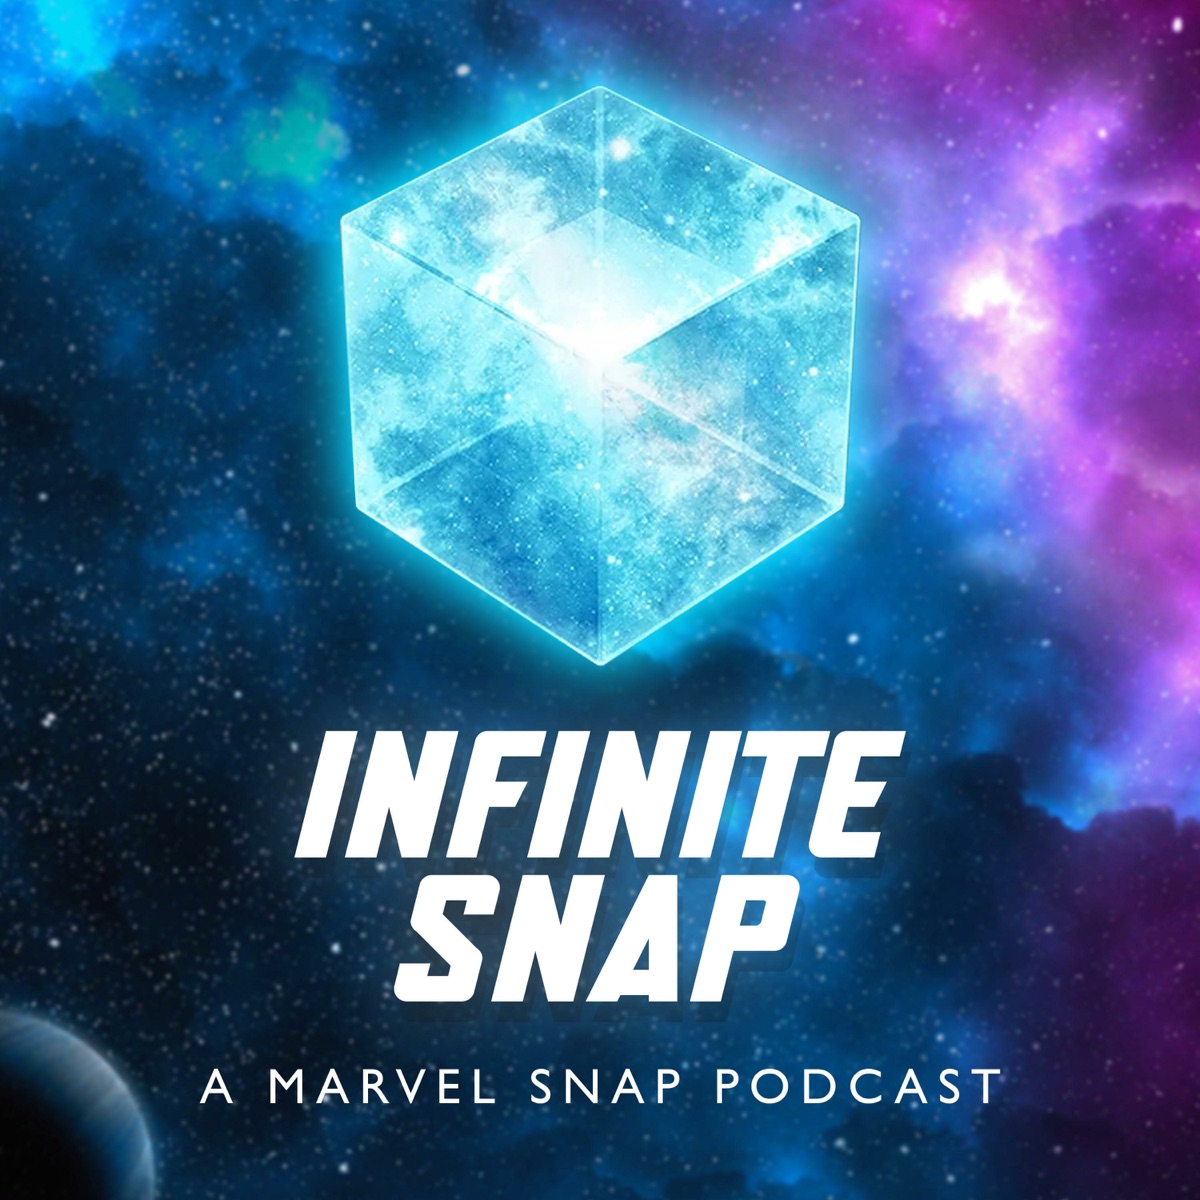 Marvel Snap release date revealed after months of beta controversy